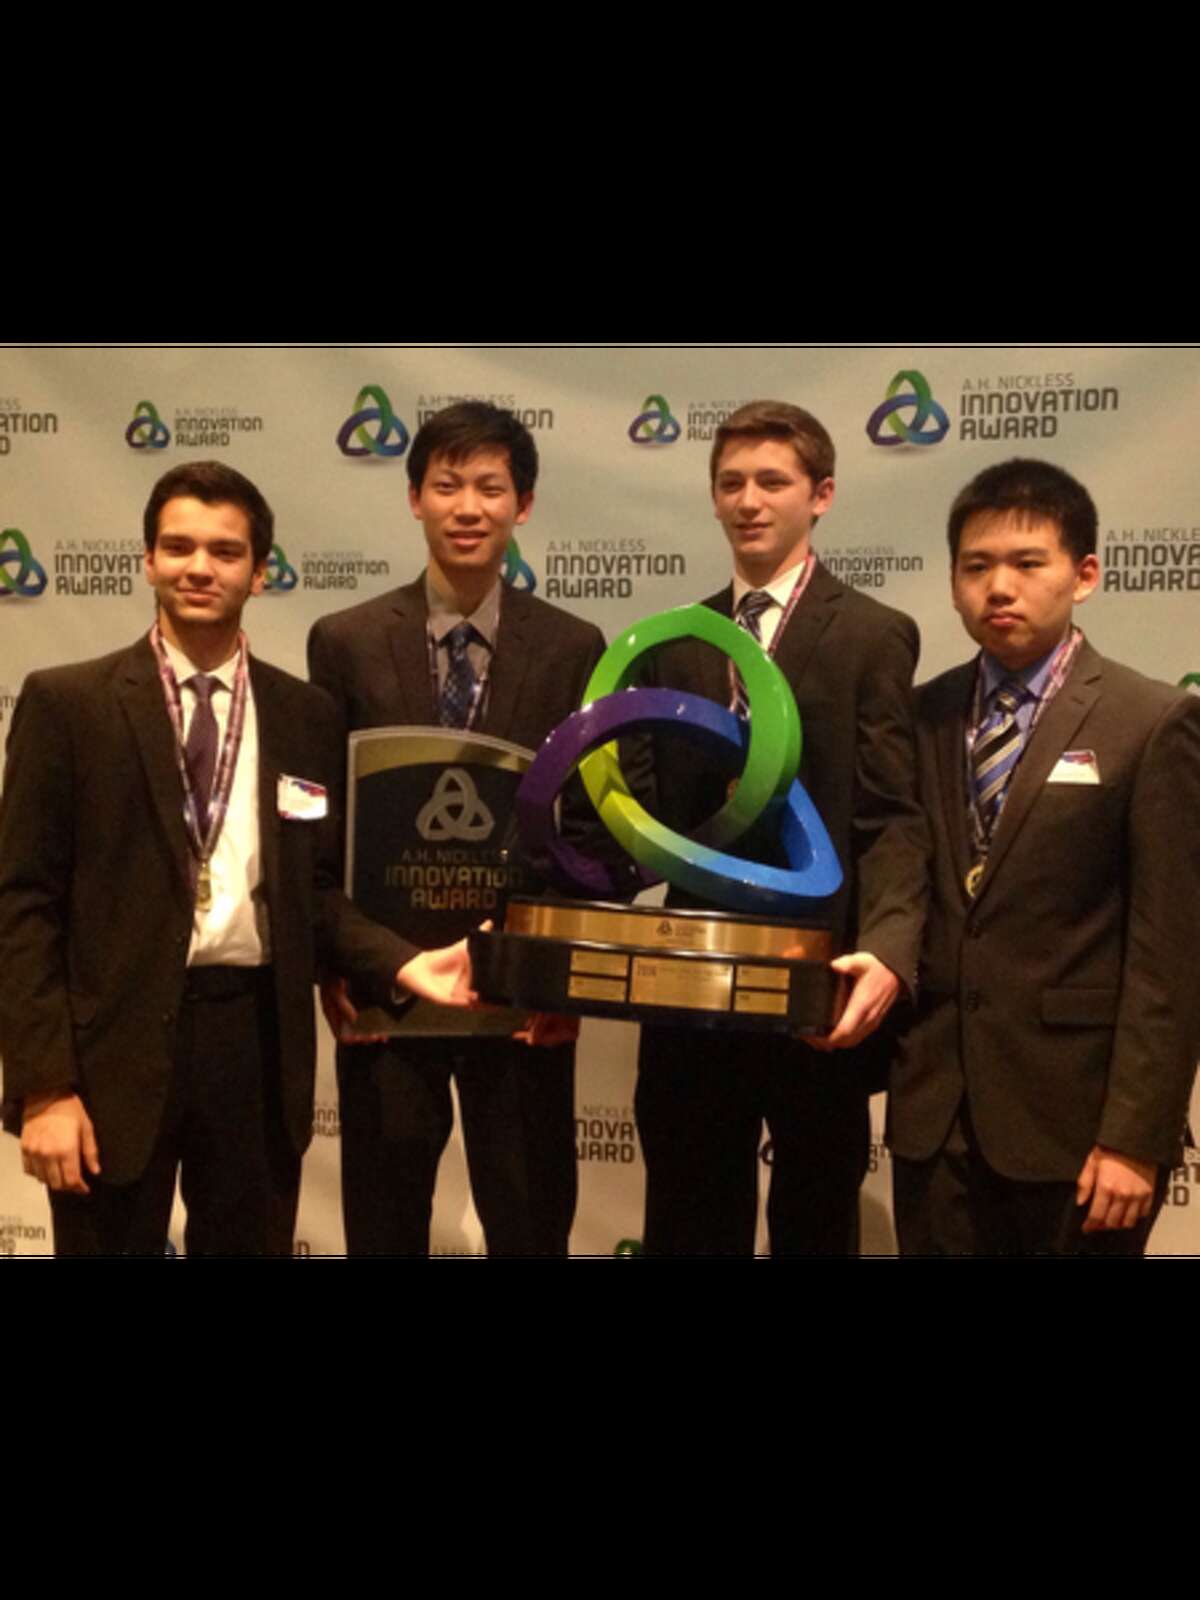 The H. H. Dow High School Nickless Innovation Award winning team from left: Aditya Middha, Brandon Zhu, Mitchell Hayes and Derek Yan. Not shown is Megan Heydrick who was absent while attending a senior prom out of state.